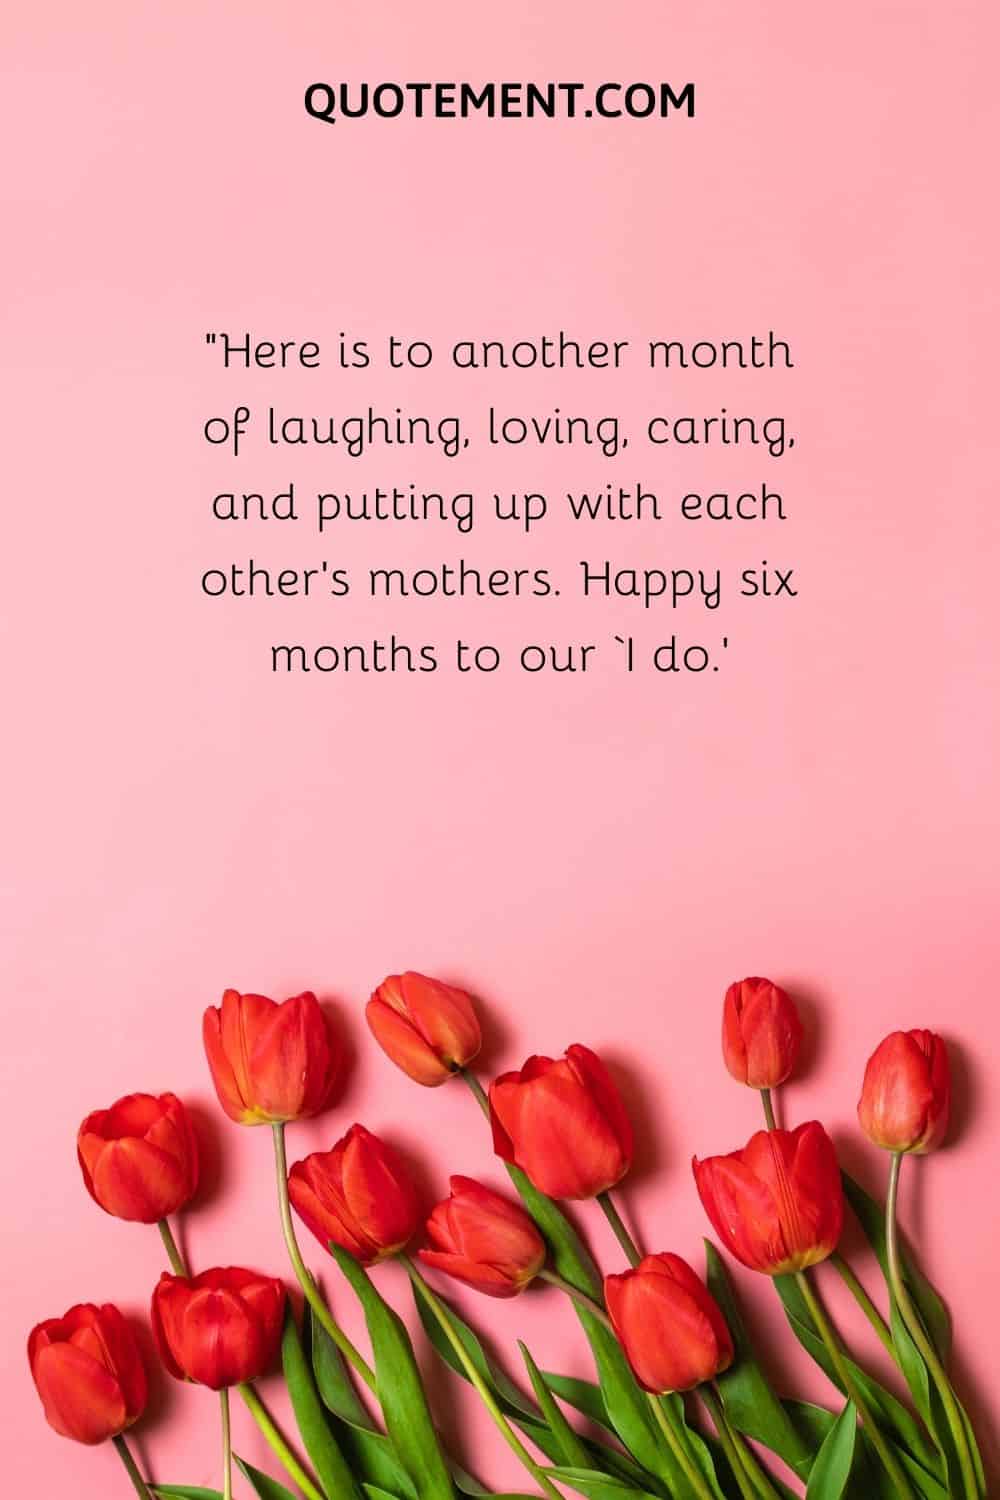 Here is to another month of laughing, loving, caring, and putting up with each other’s mothers.